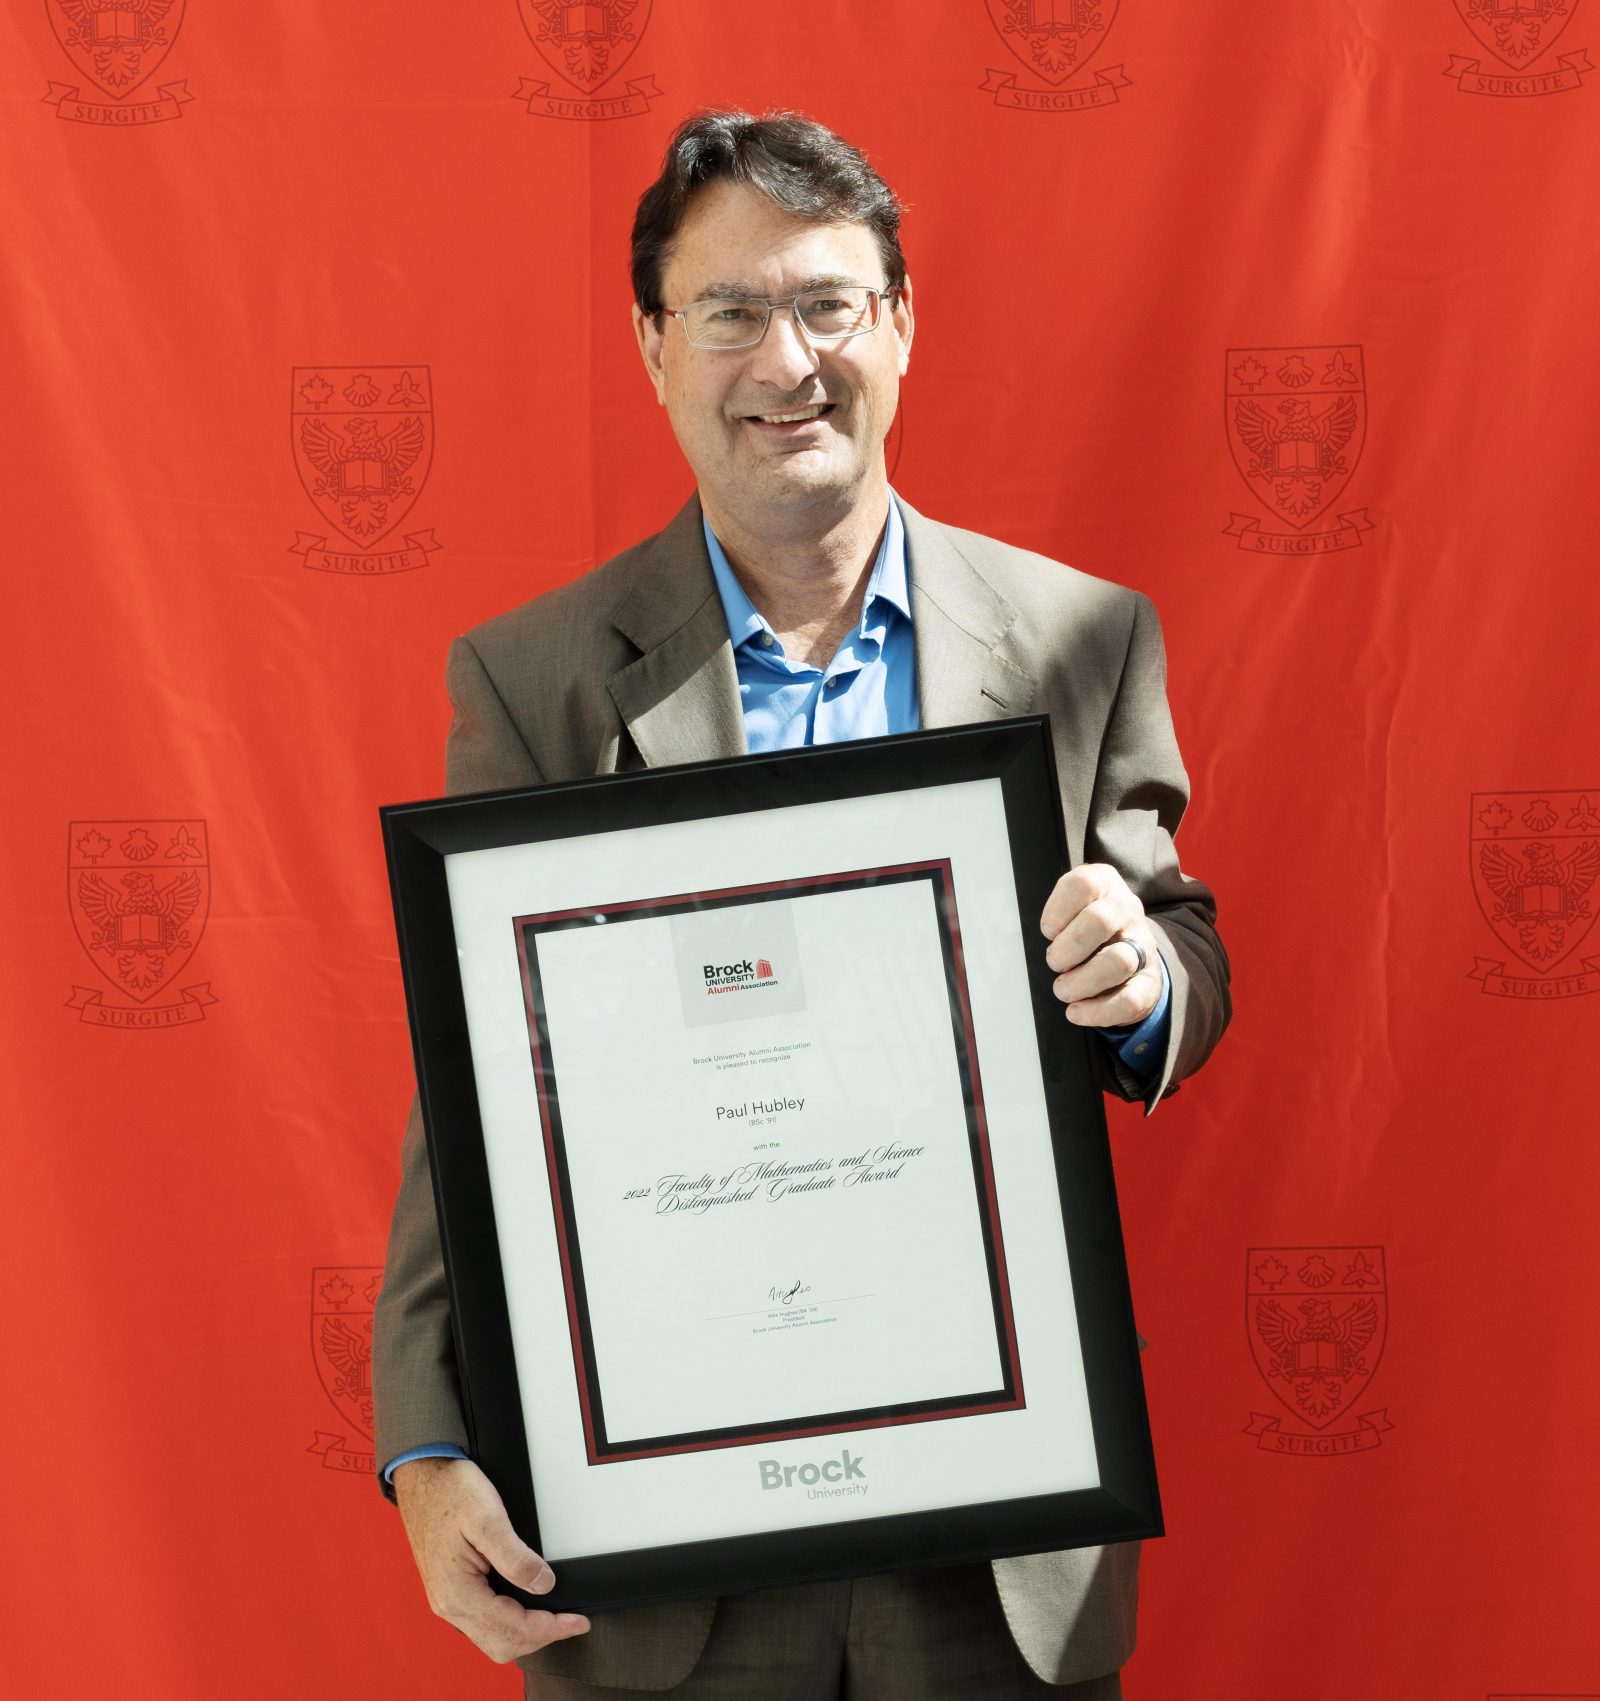 A man holding a framed certificate stands in front of a red backdrop.